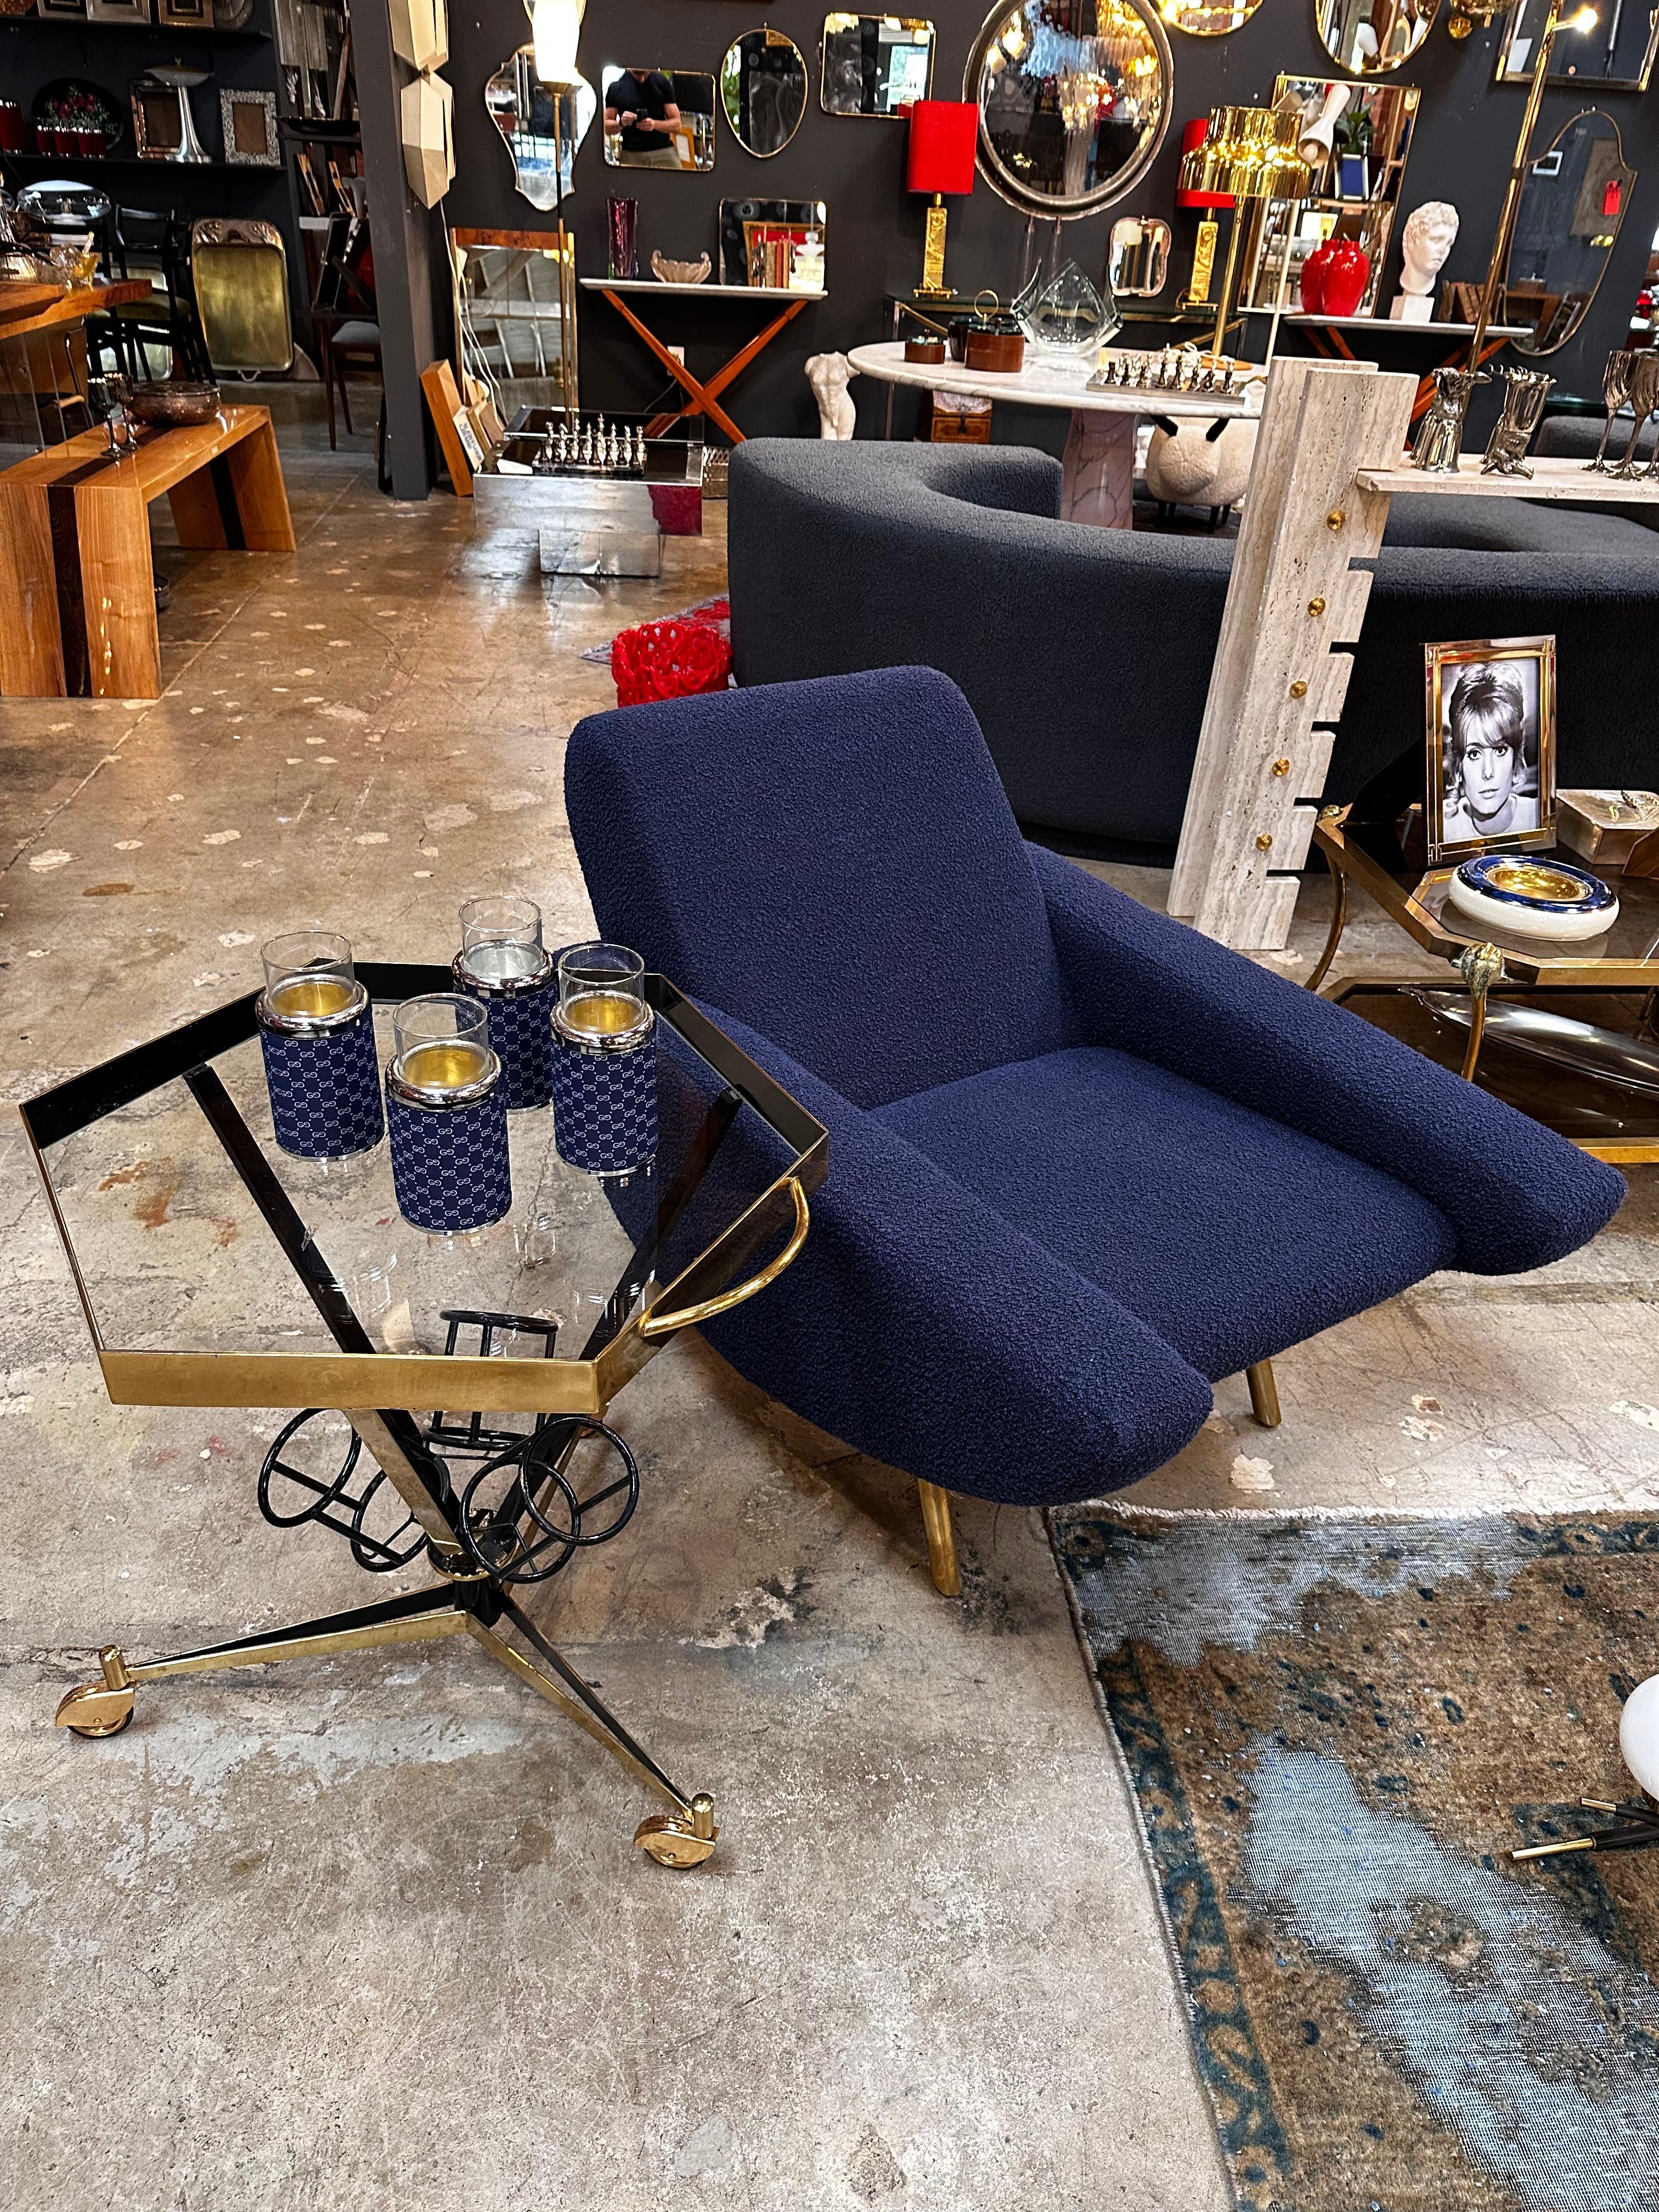 The Mid Century Modern Italian Bar Cart from the 1960s, featuring brass tires and a metal frame with a 3-bottle holder, is a stylish and functional piece of vintage furniture. Its design perfectly encapsulates the mid-century aesthetic with clean